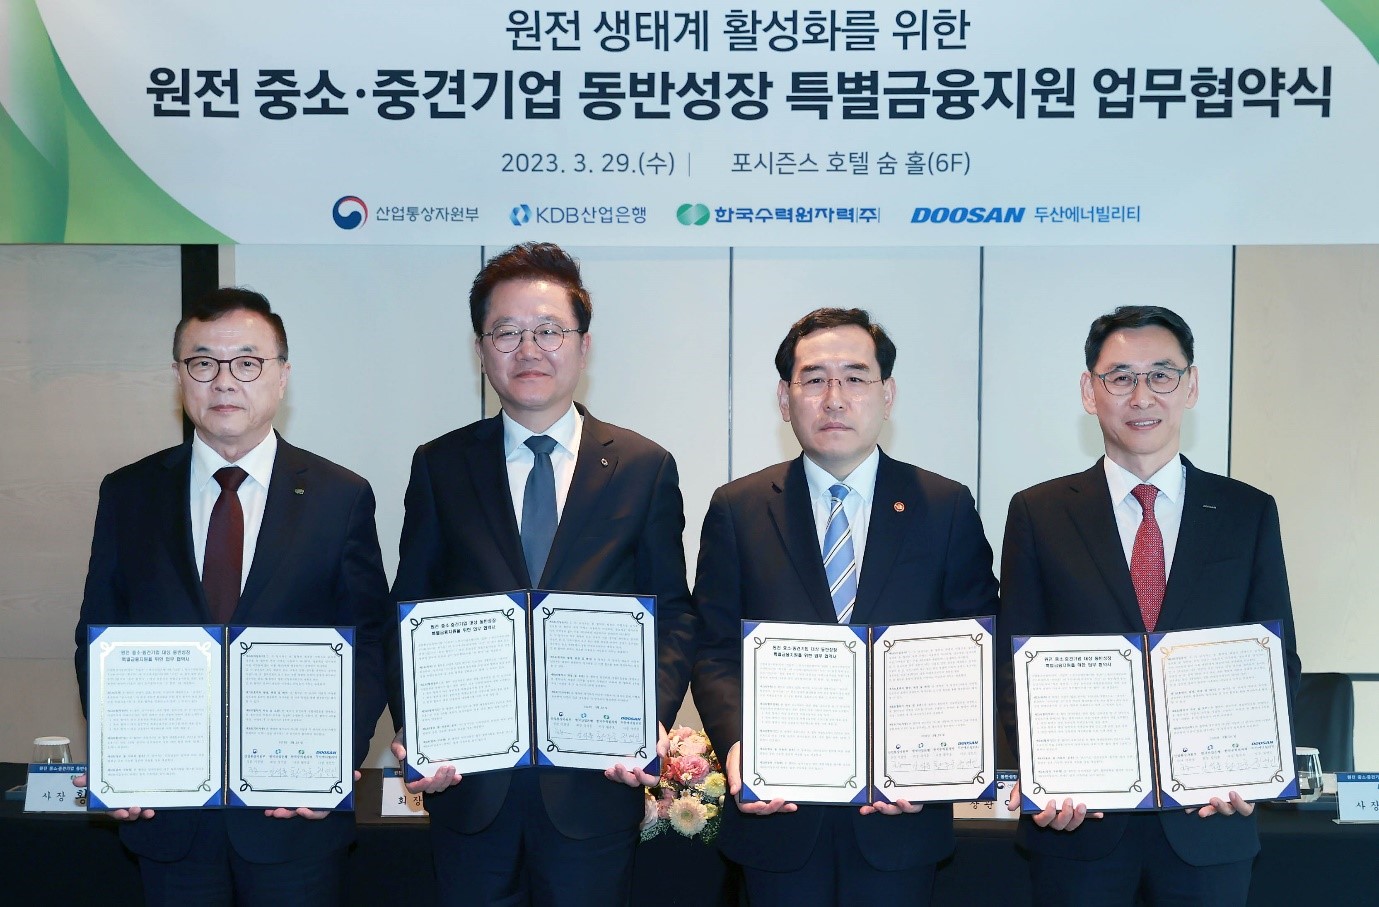 Minister attends special financial assistance MOU ceremony for NPP firms Image 0